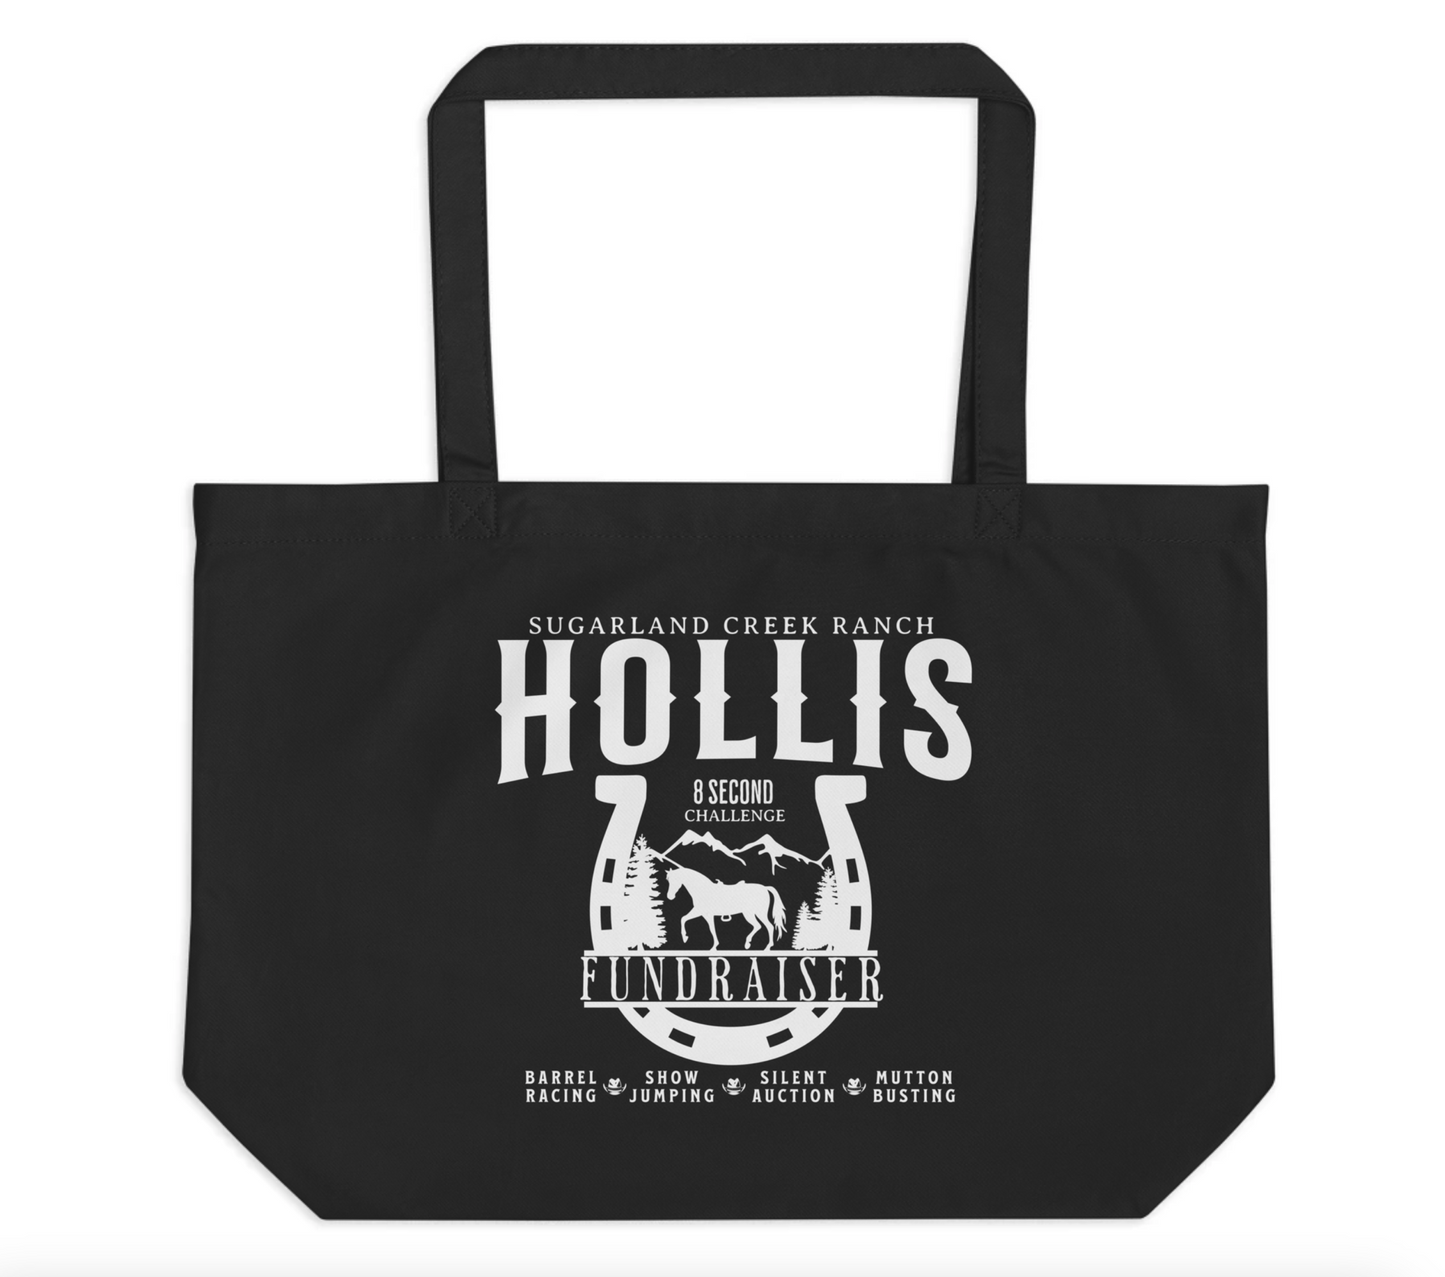 "Hollis Fundraiser" Collector's Edition Organic Large Tote Bag